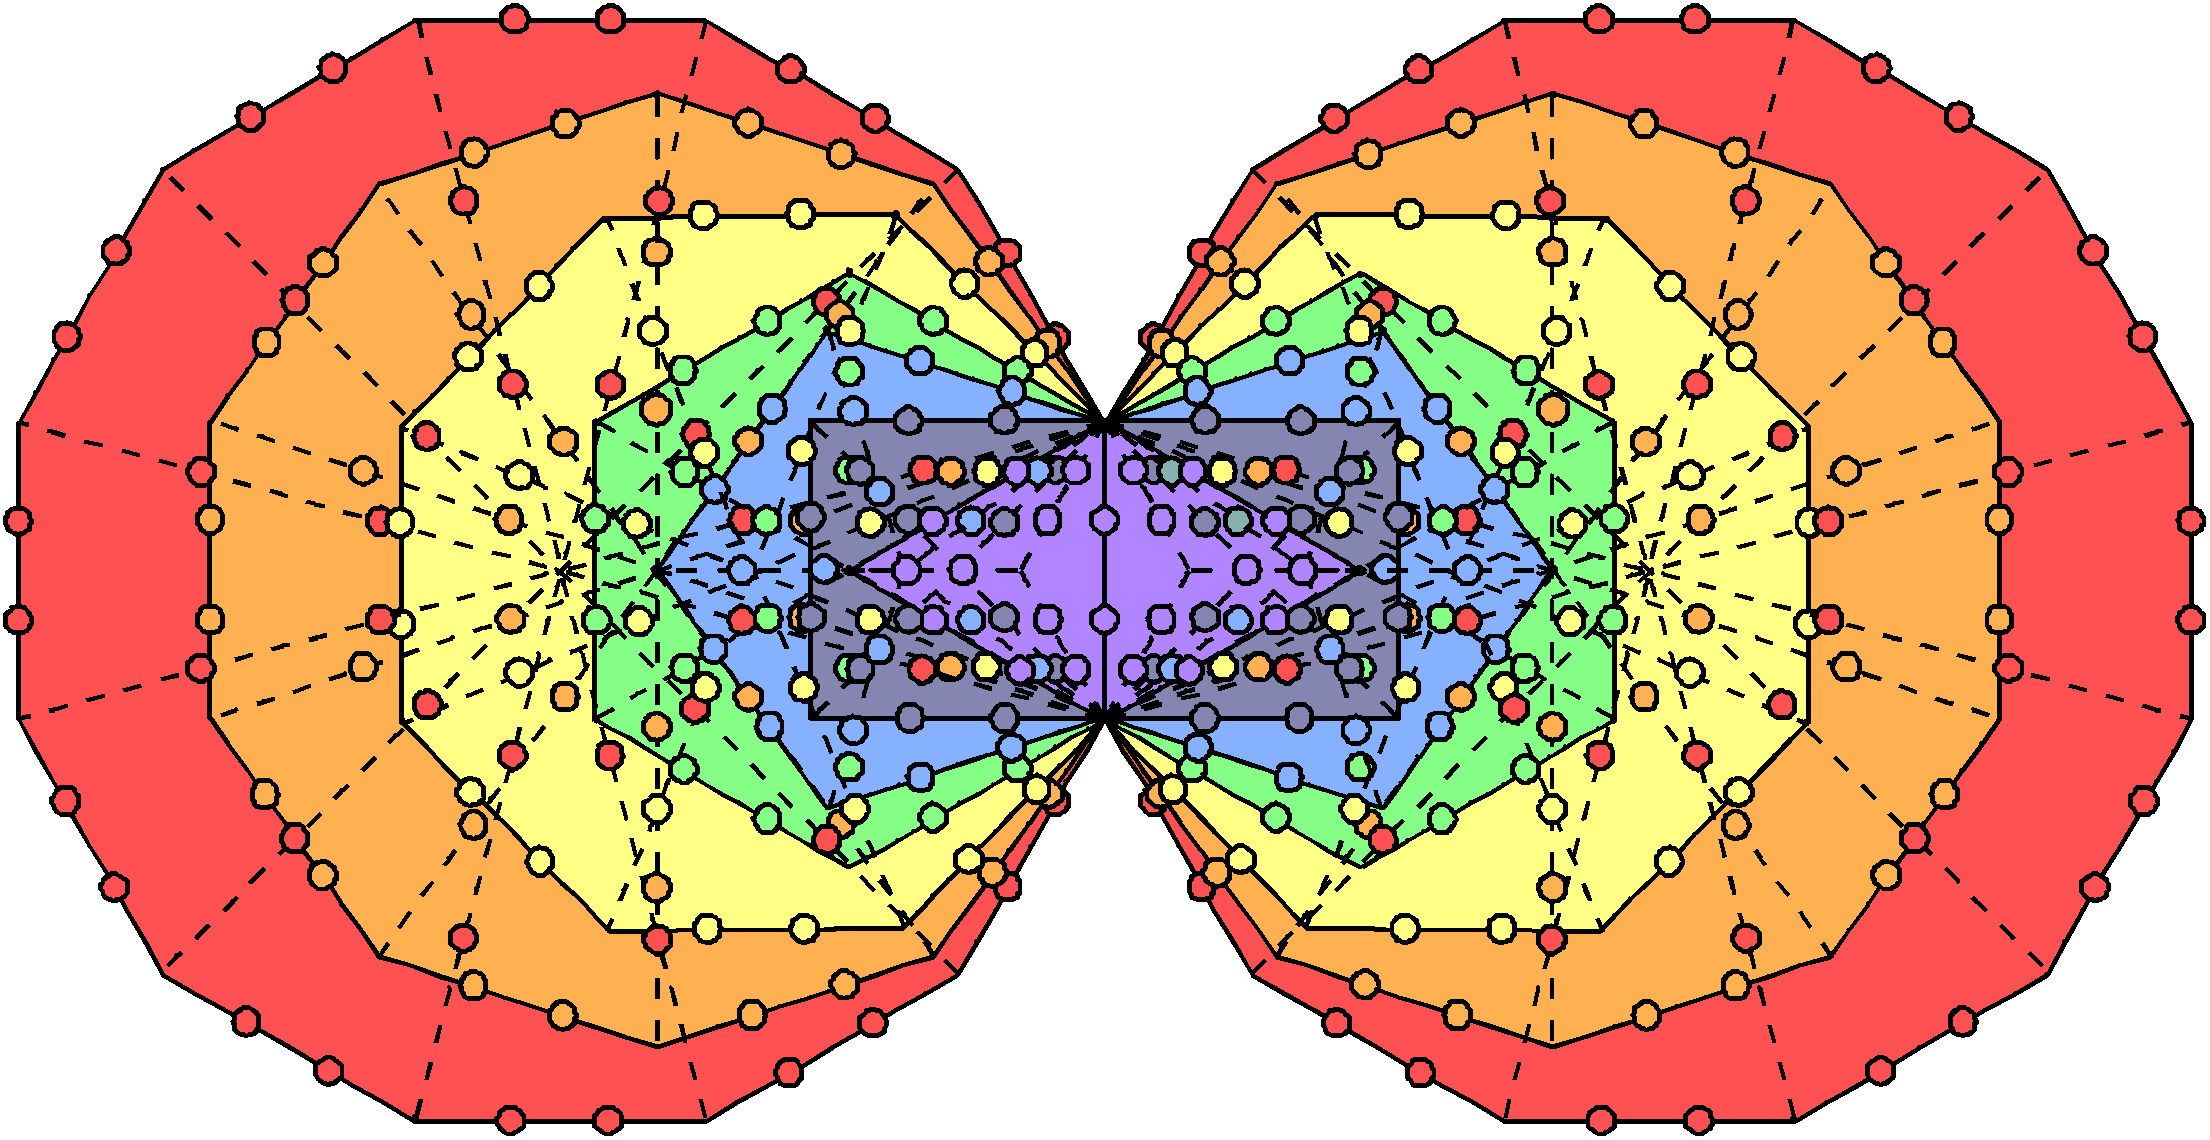 350 hexagonal yods line 94 tetractyses in (7+7) enfolded polygons